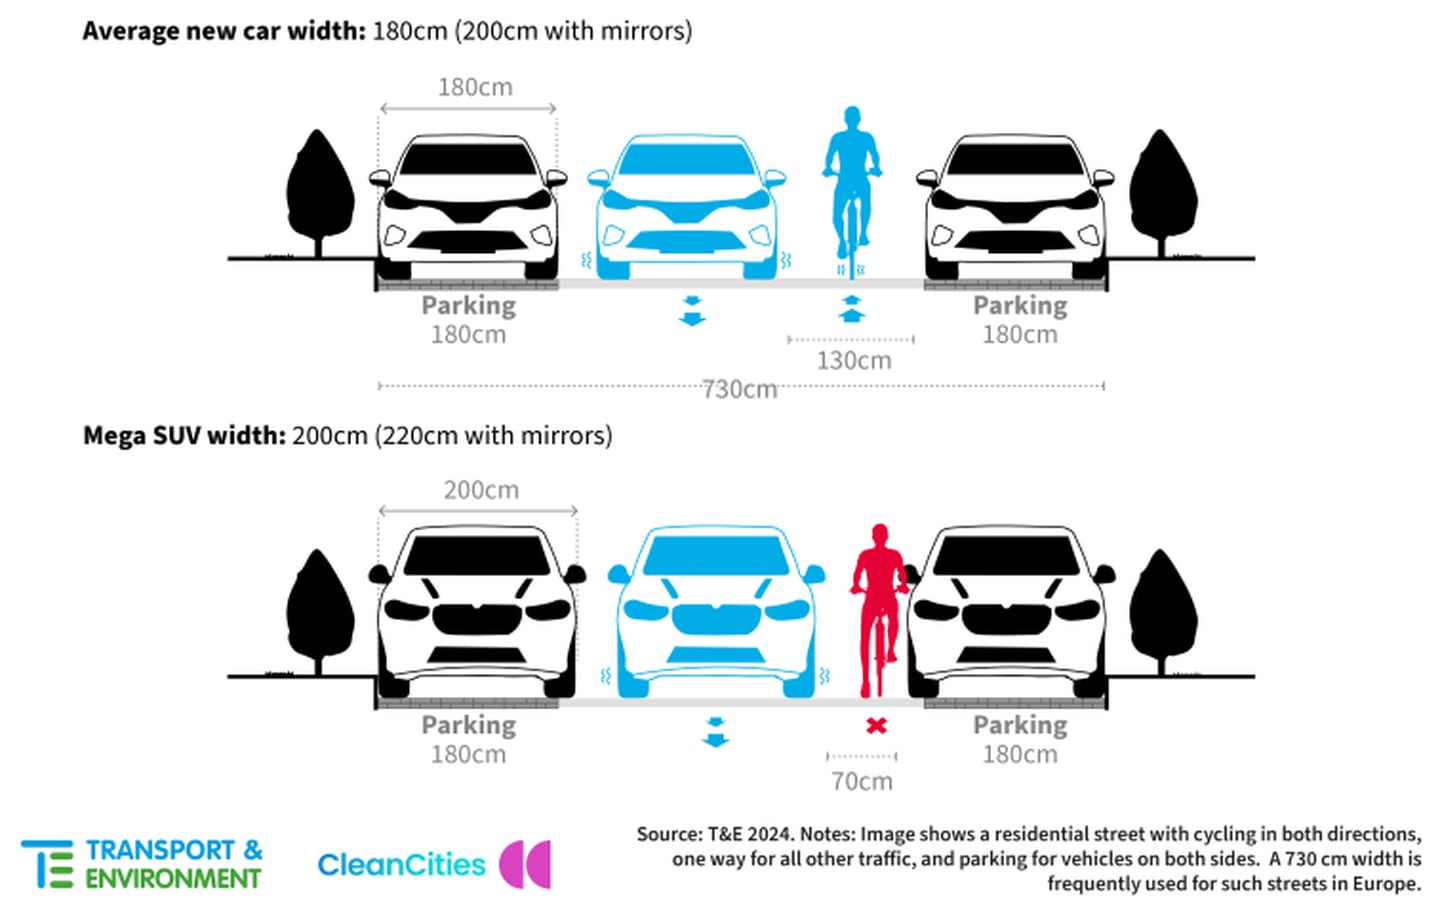 Car width graphic from T&E